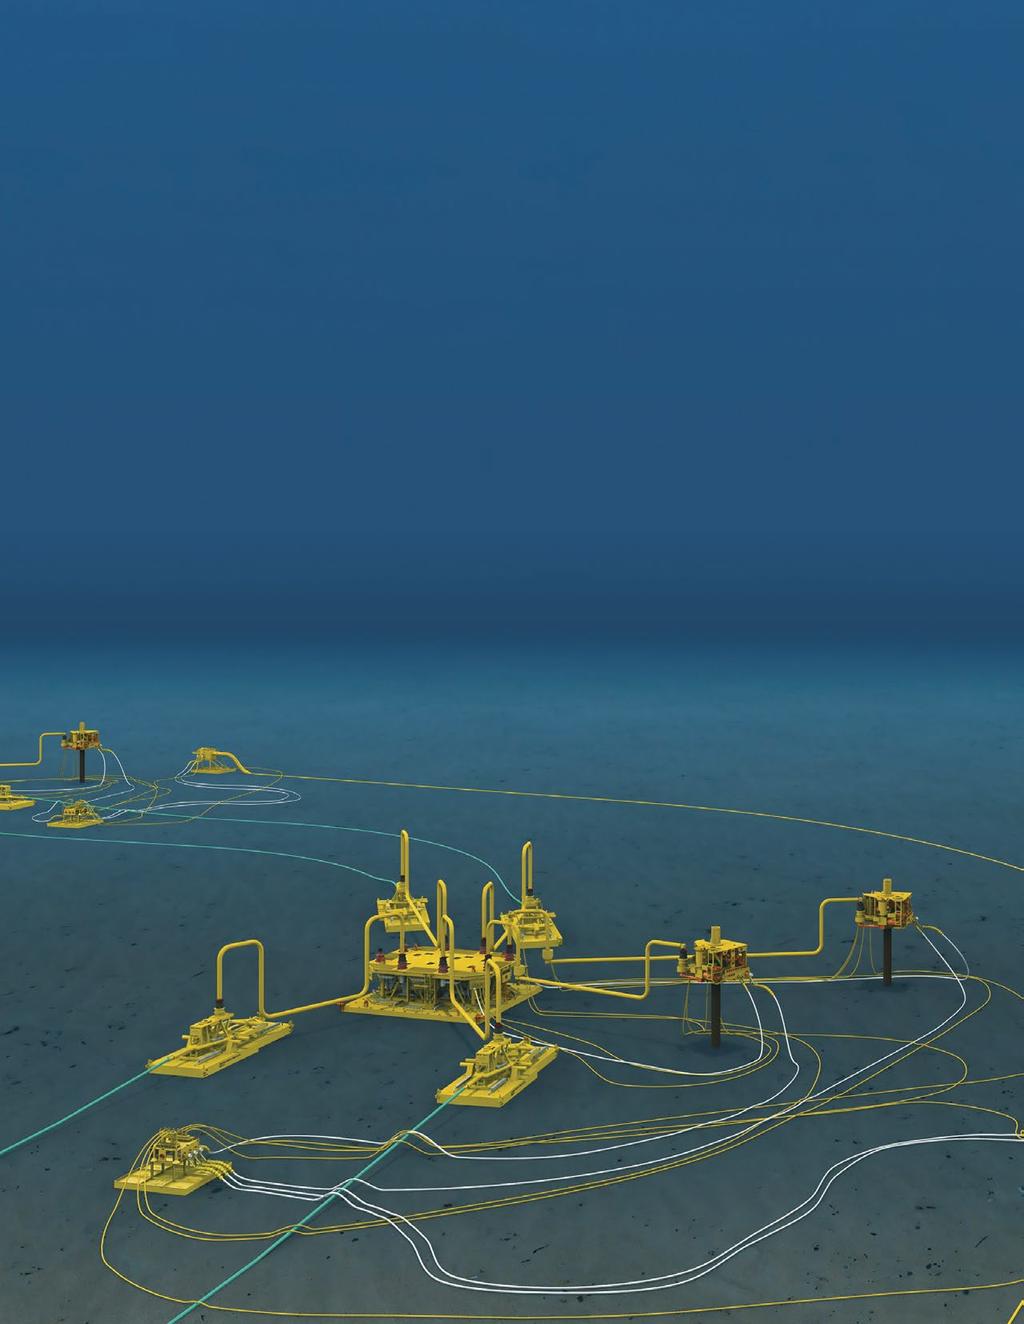 Subsea cables We deliver optimal solutions for the planning, design, construction and operation of subsea power cables.